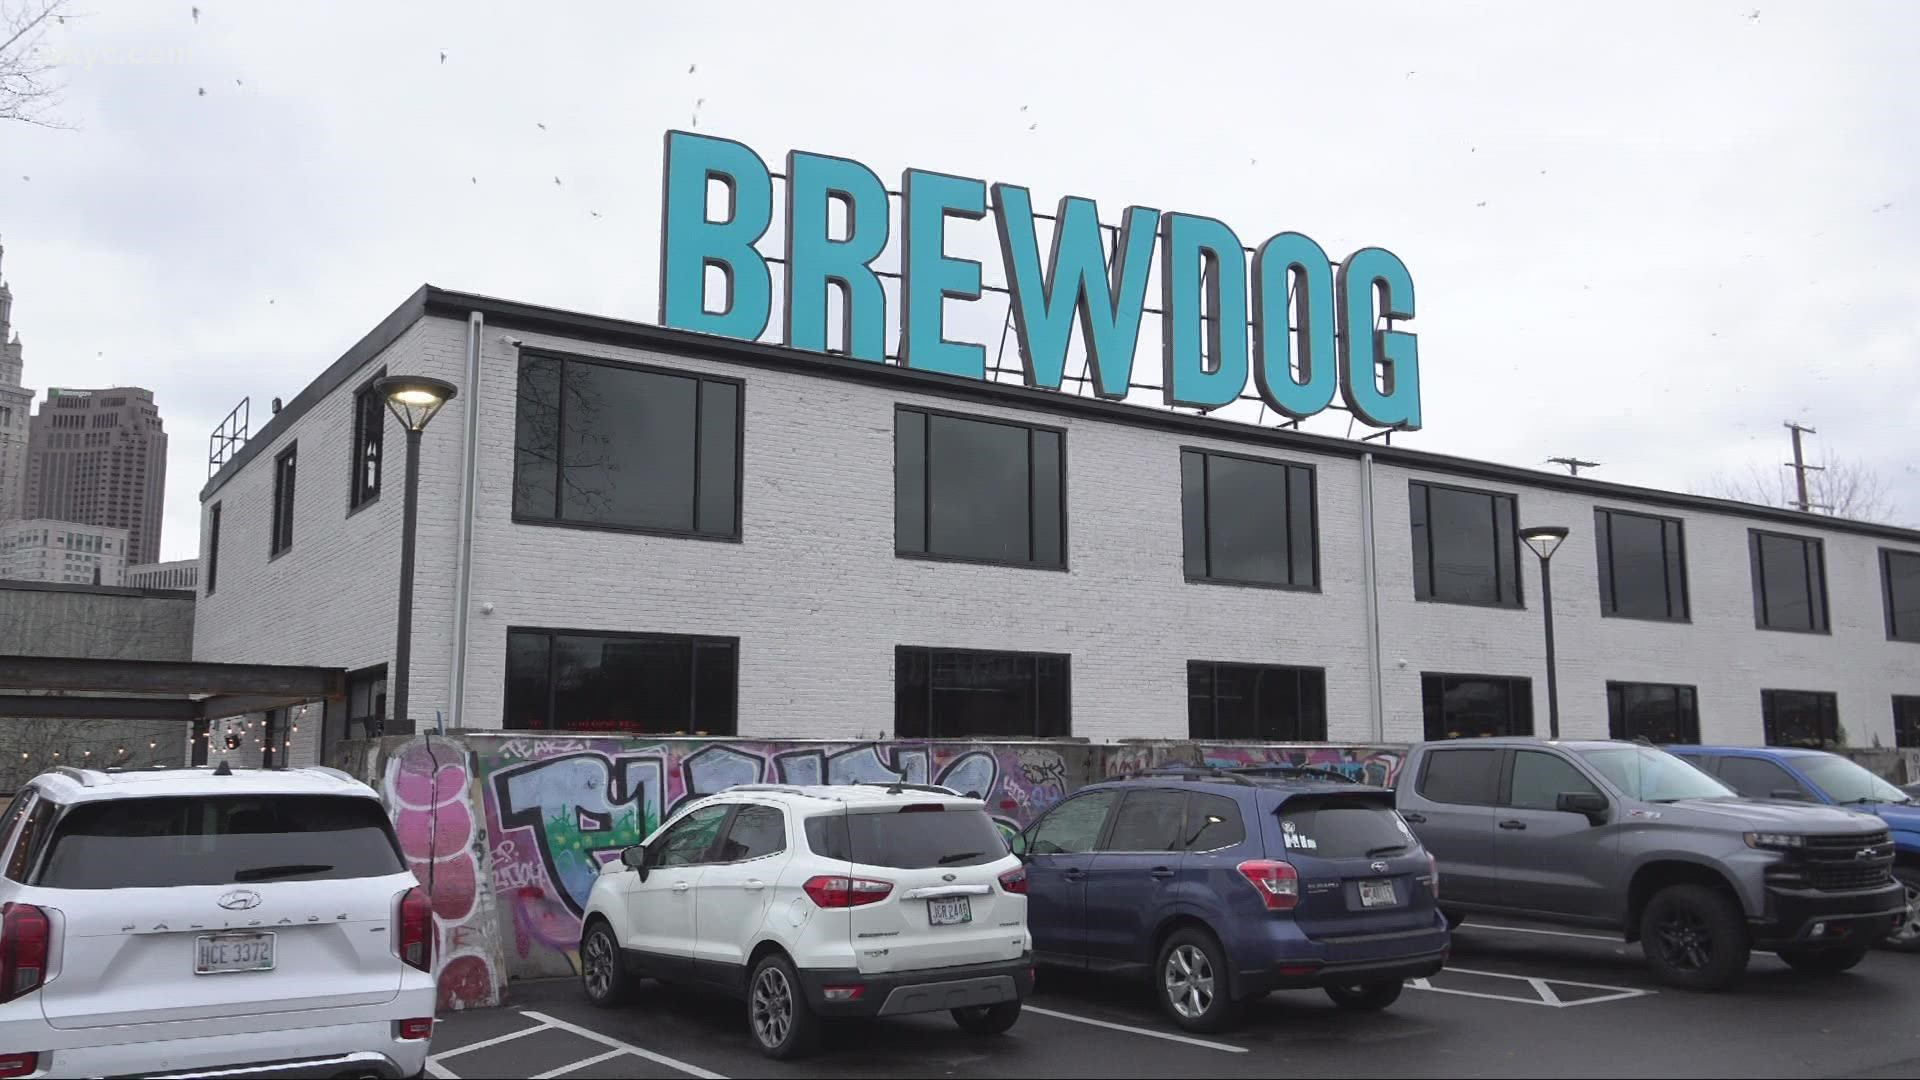 Cleveland has yet another brewery in town as BrewDog opened its doors for the first time today.